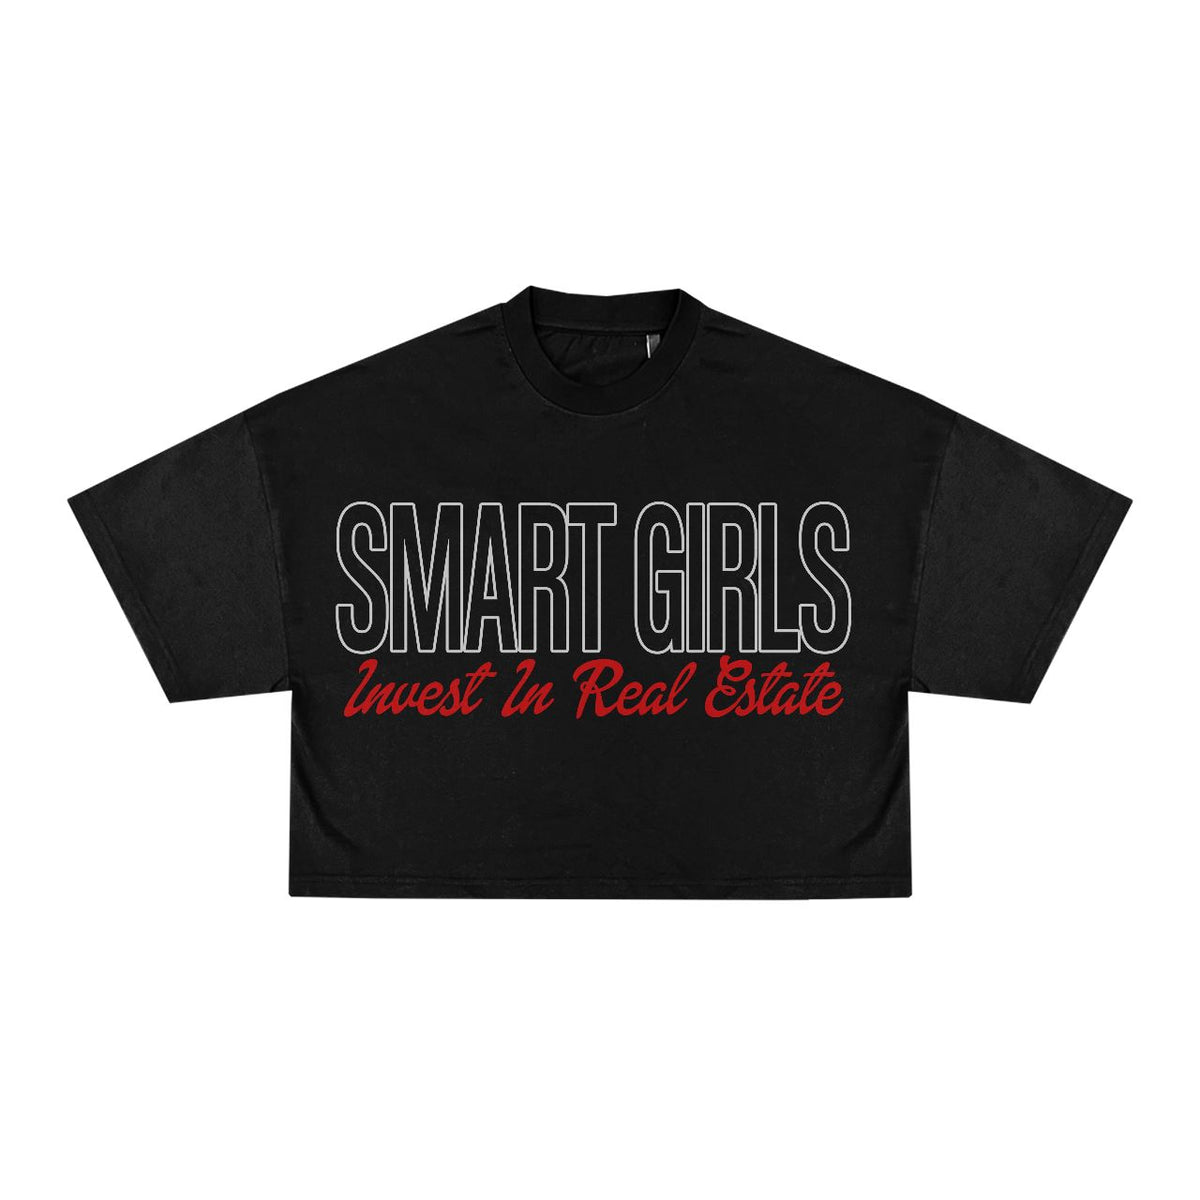 Smart girls invest in real estate crop top T-Shirt